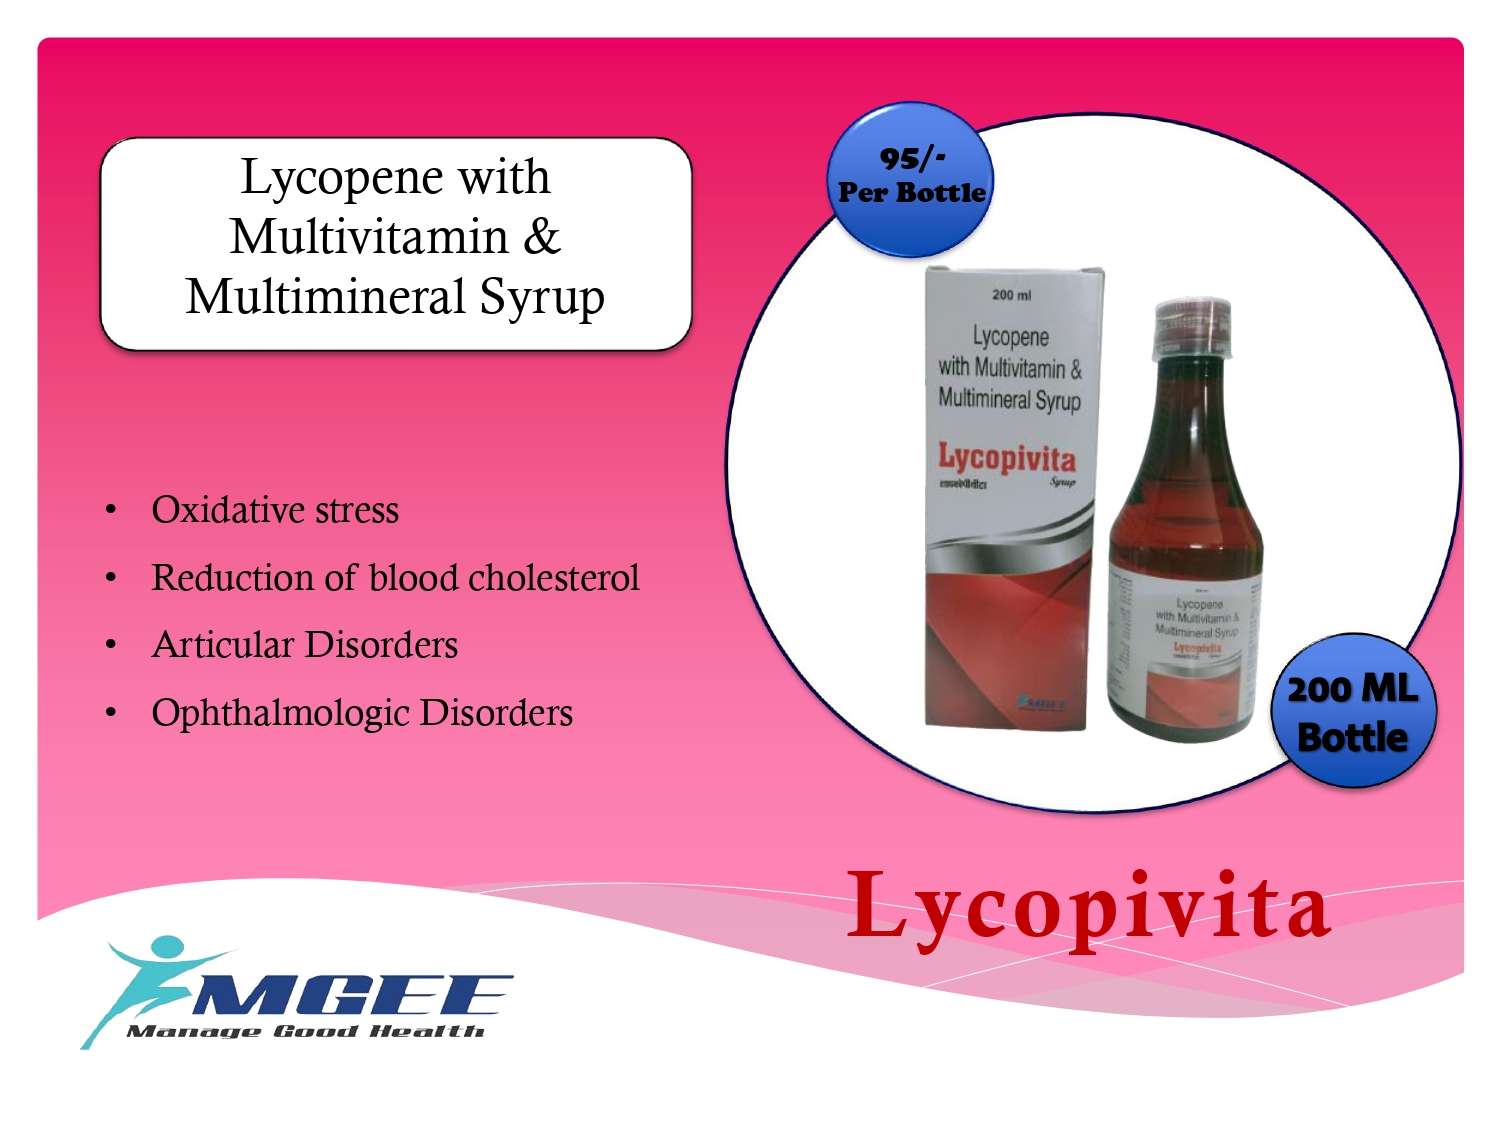 lycopene 10% 1000 mcg vitamin a concentrated (oily form) ip 16 syp
food